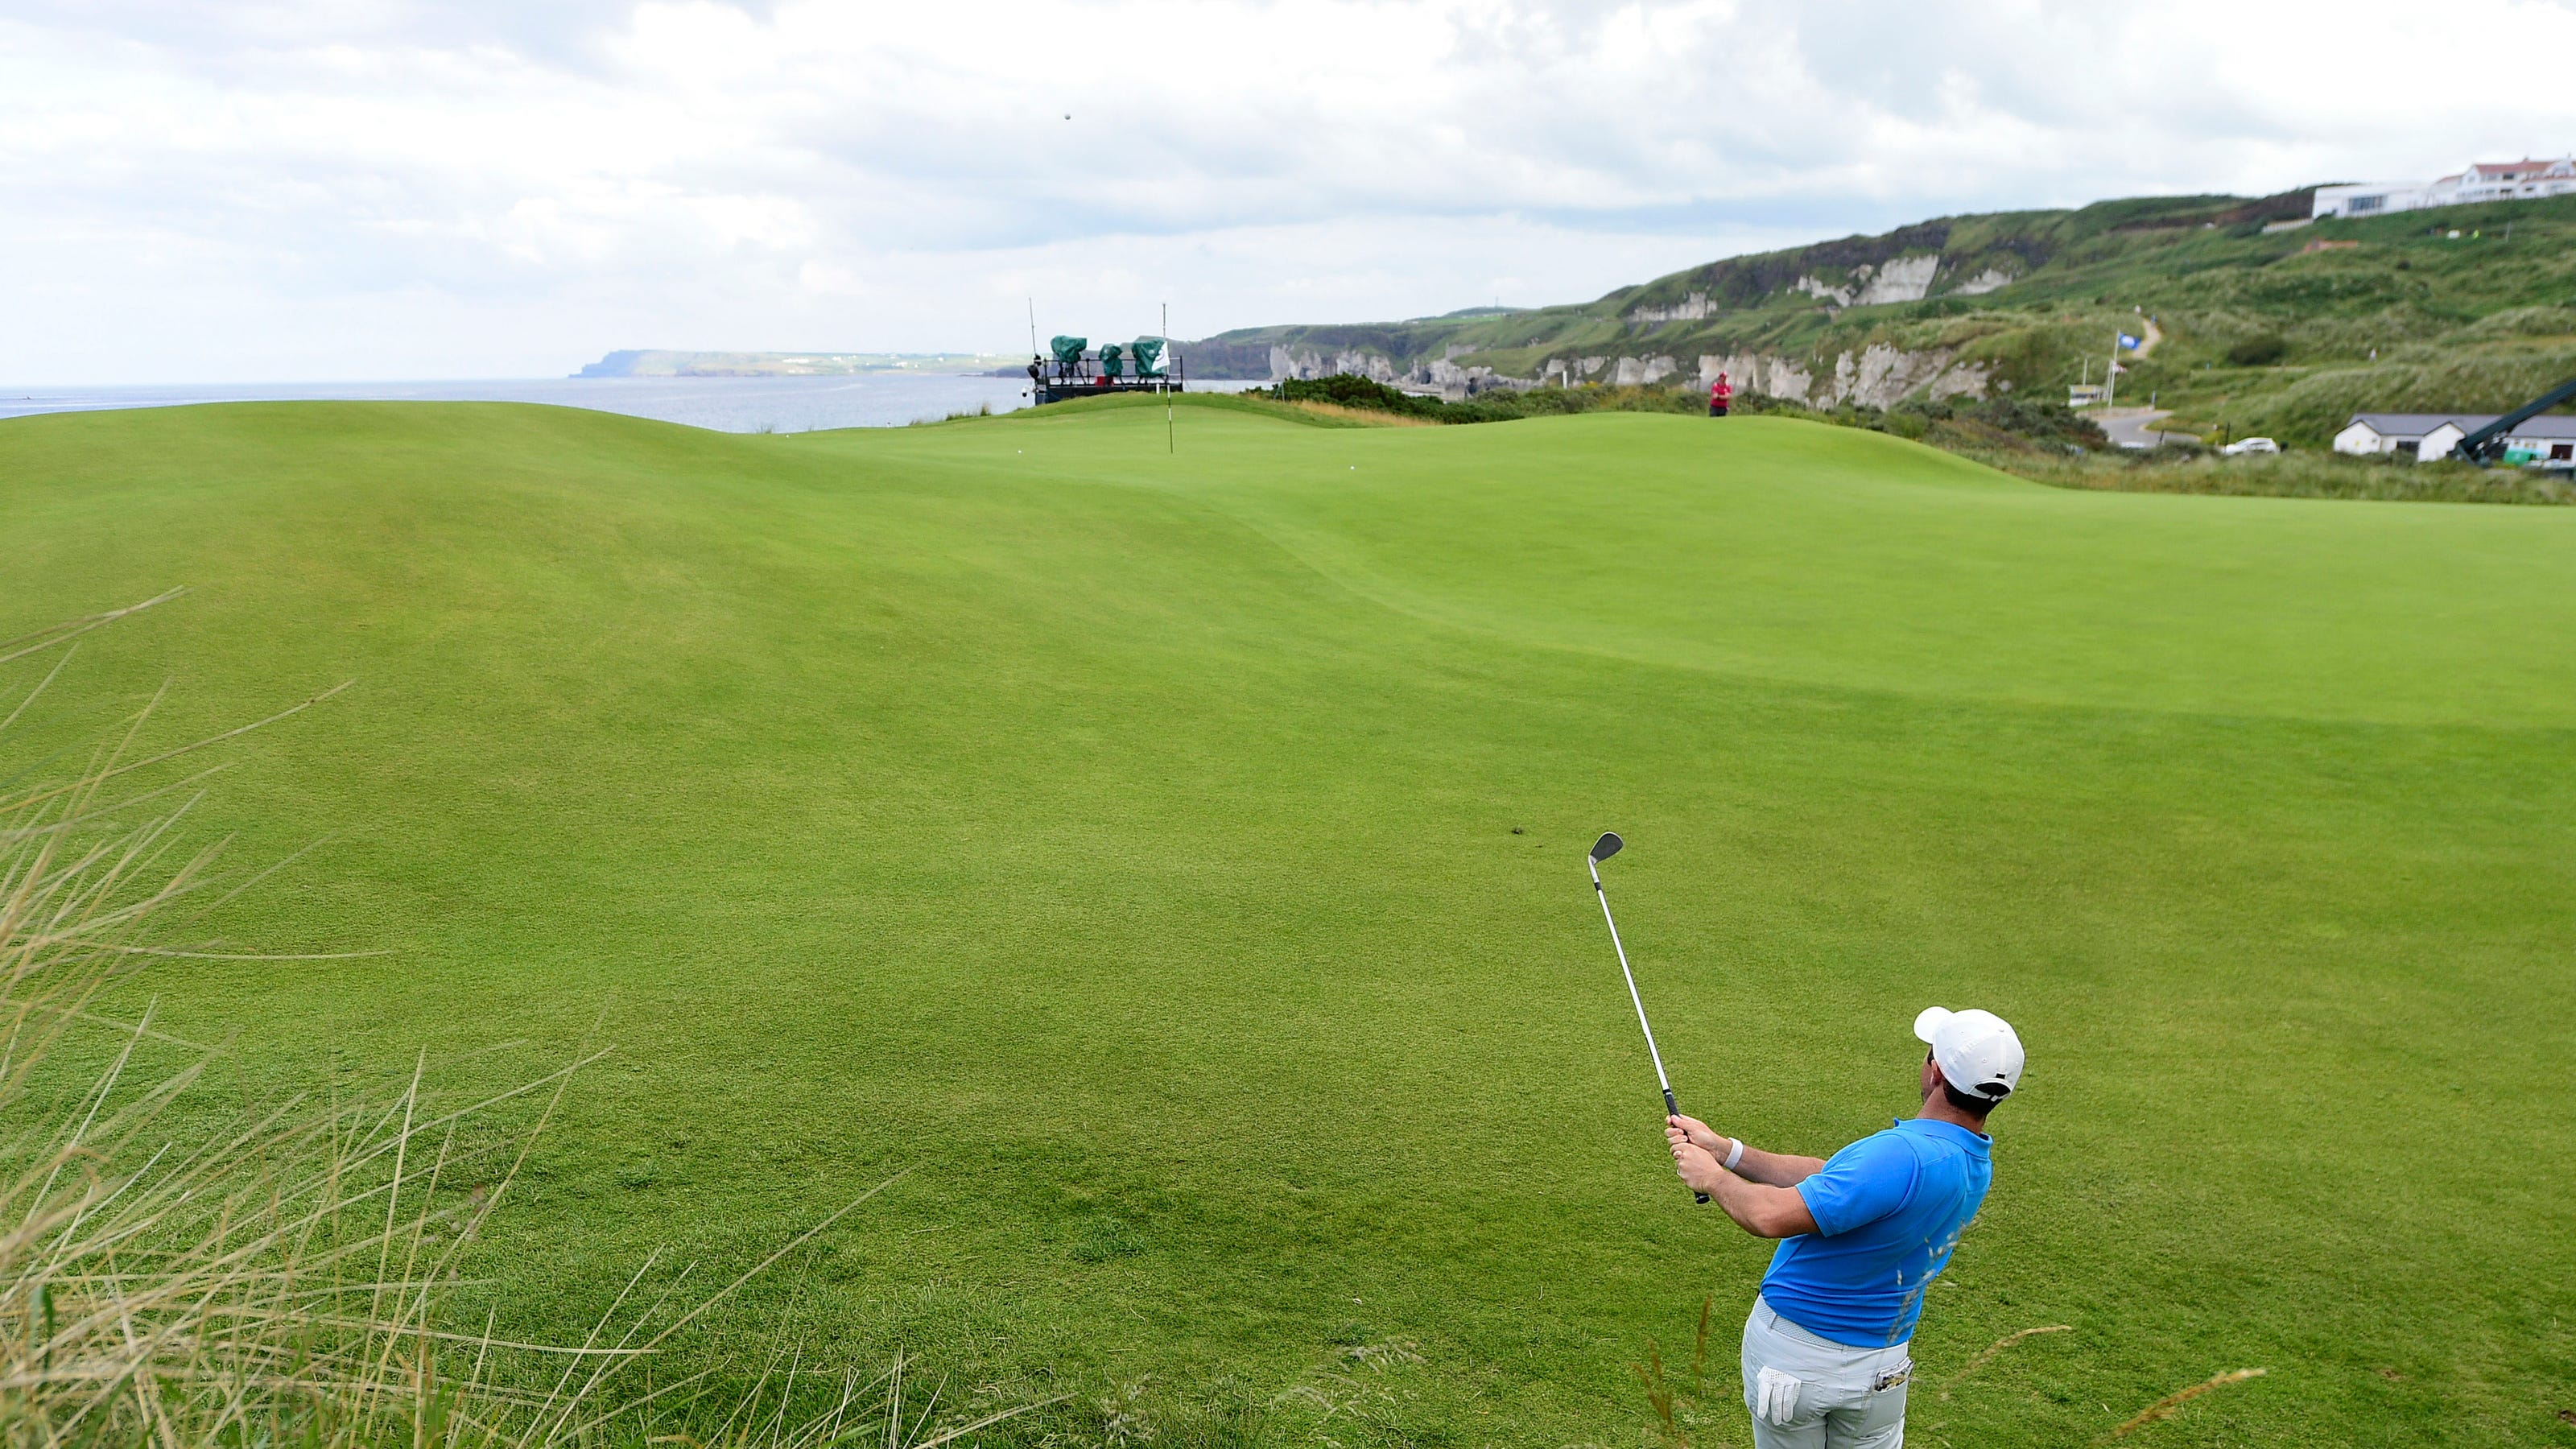 British Open 2019: Who to watch at Royal Portrush